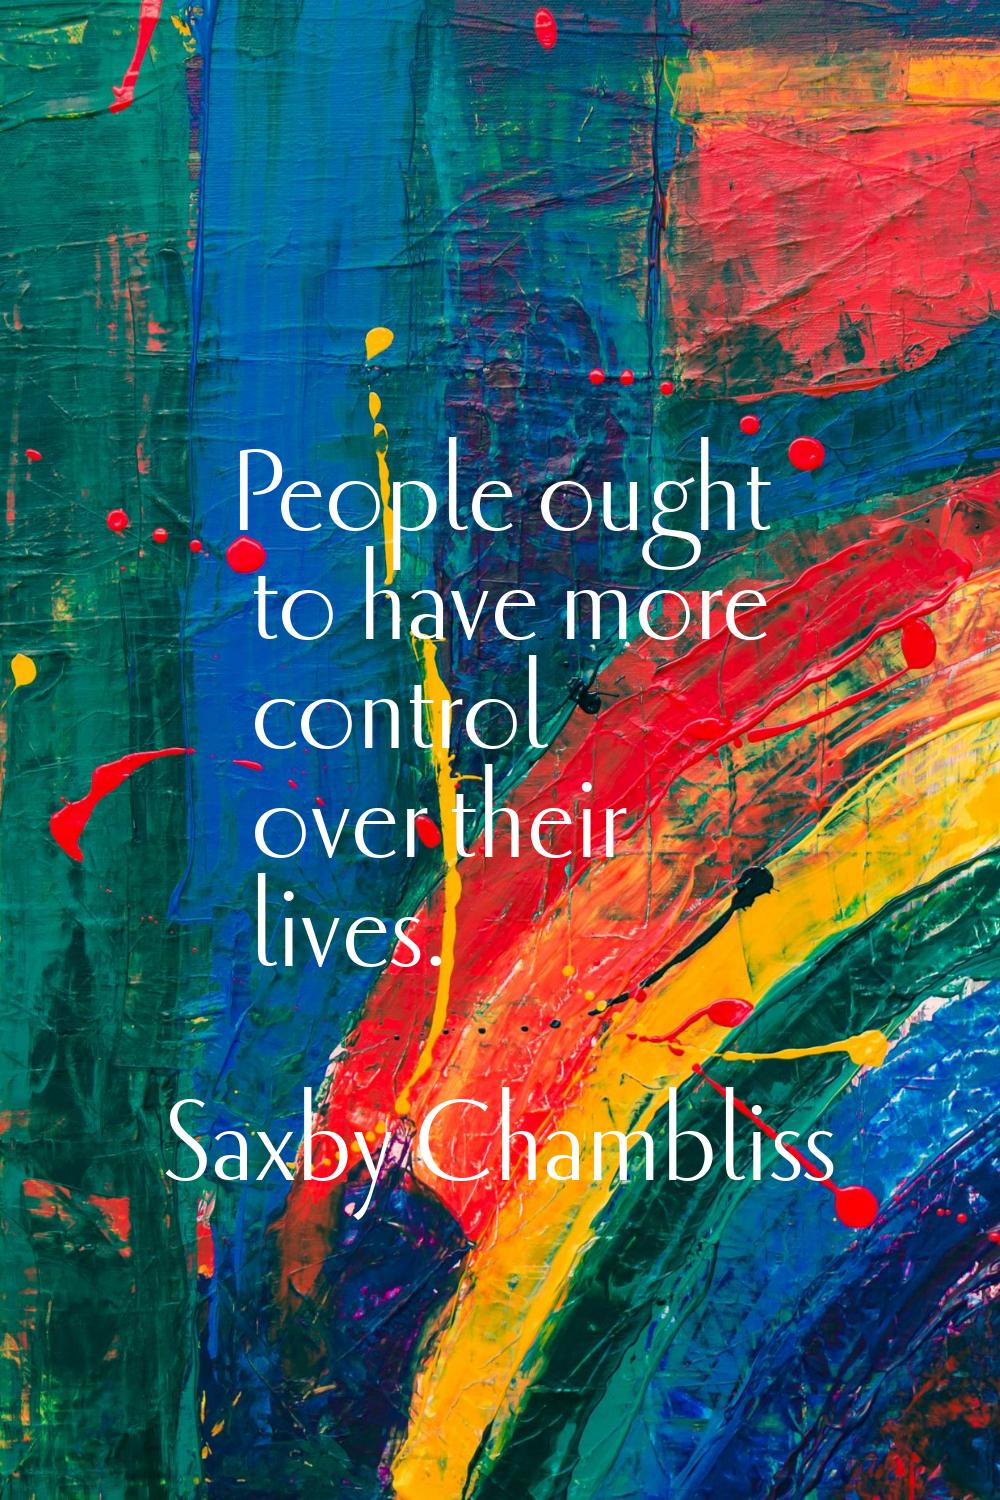 People ought to have more control over their lives.